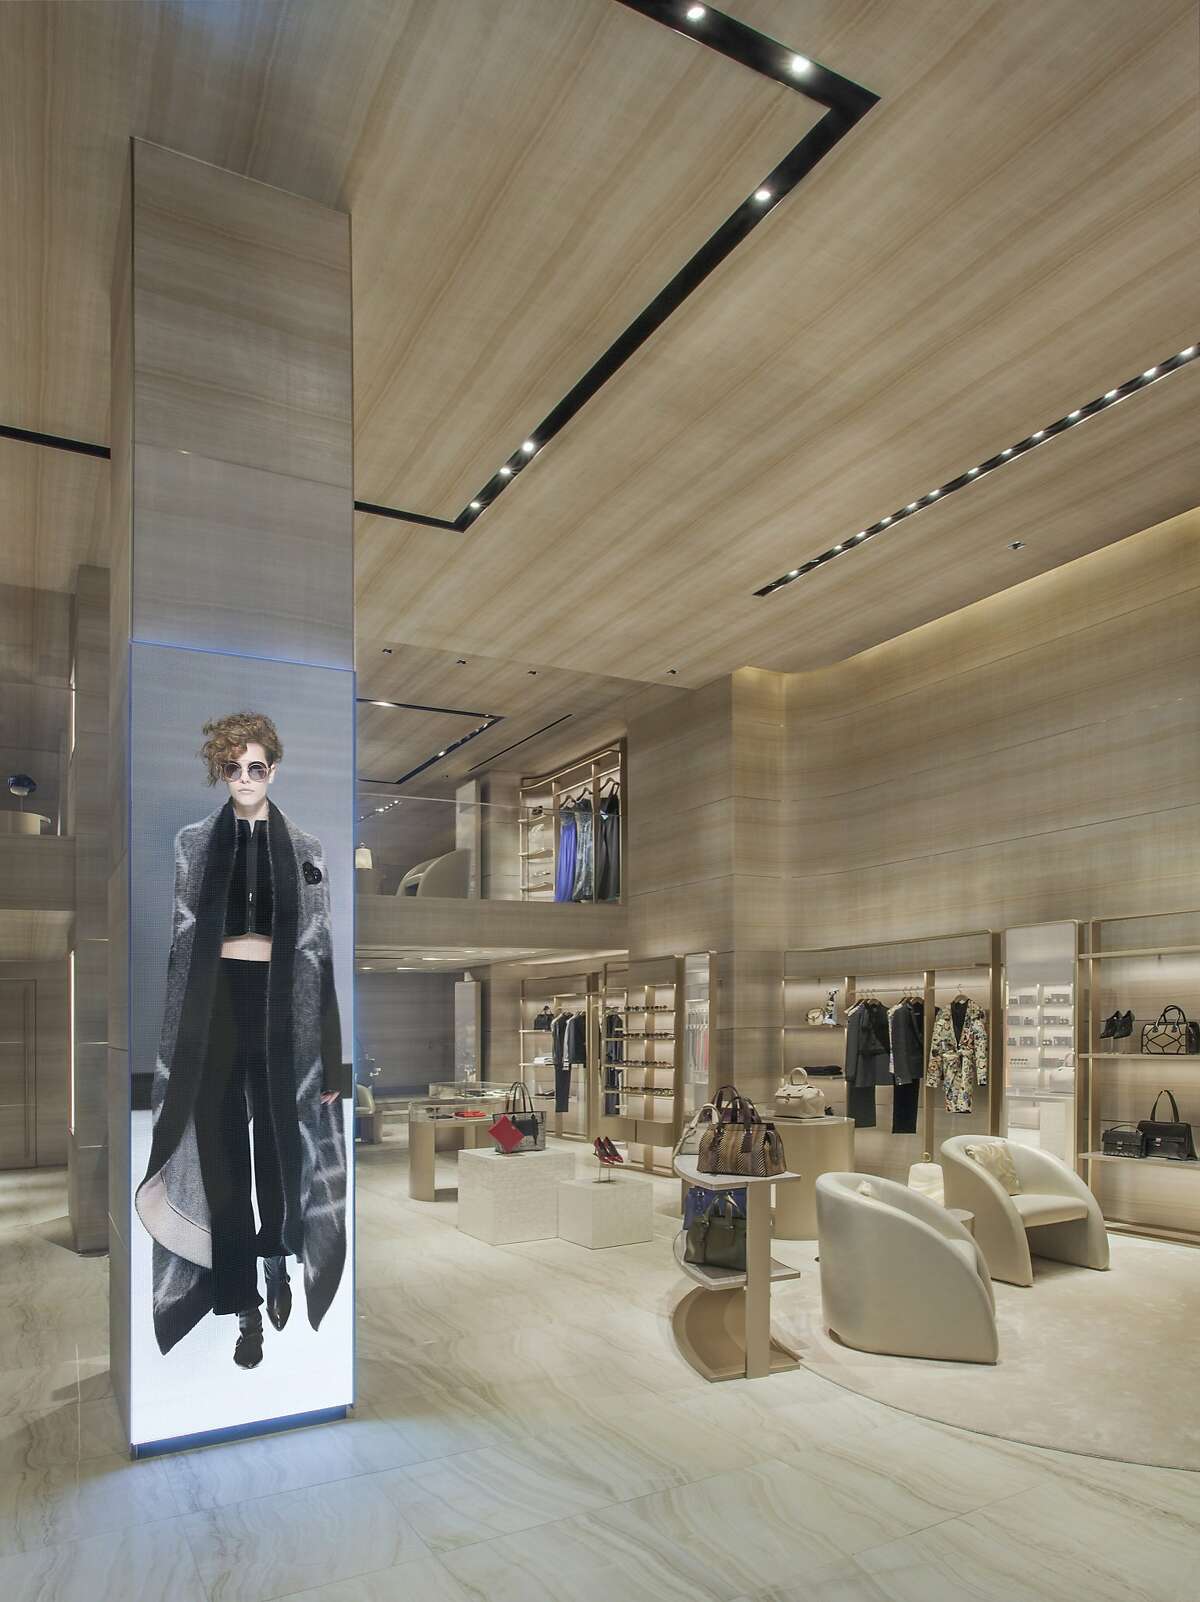 The Giorgio Armani boutique in San Francisco has moved from its former home on Post Street to a new location at 166 Geary St. It's the first Armani boutique in the U.S. to be designed using inspiration from the new-concept Armani boutique in Milan, which opened in 2015.